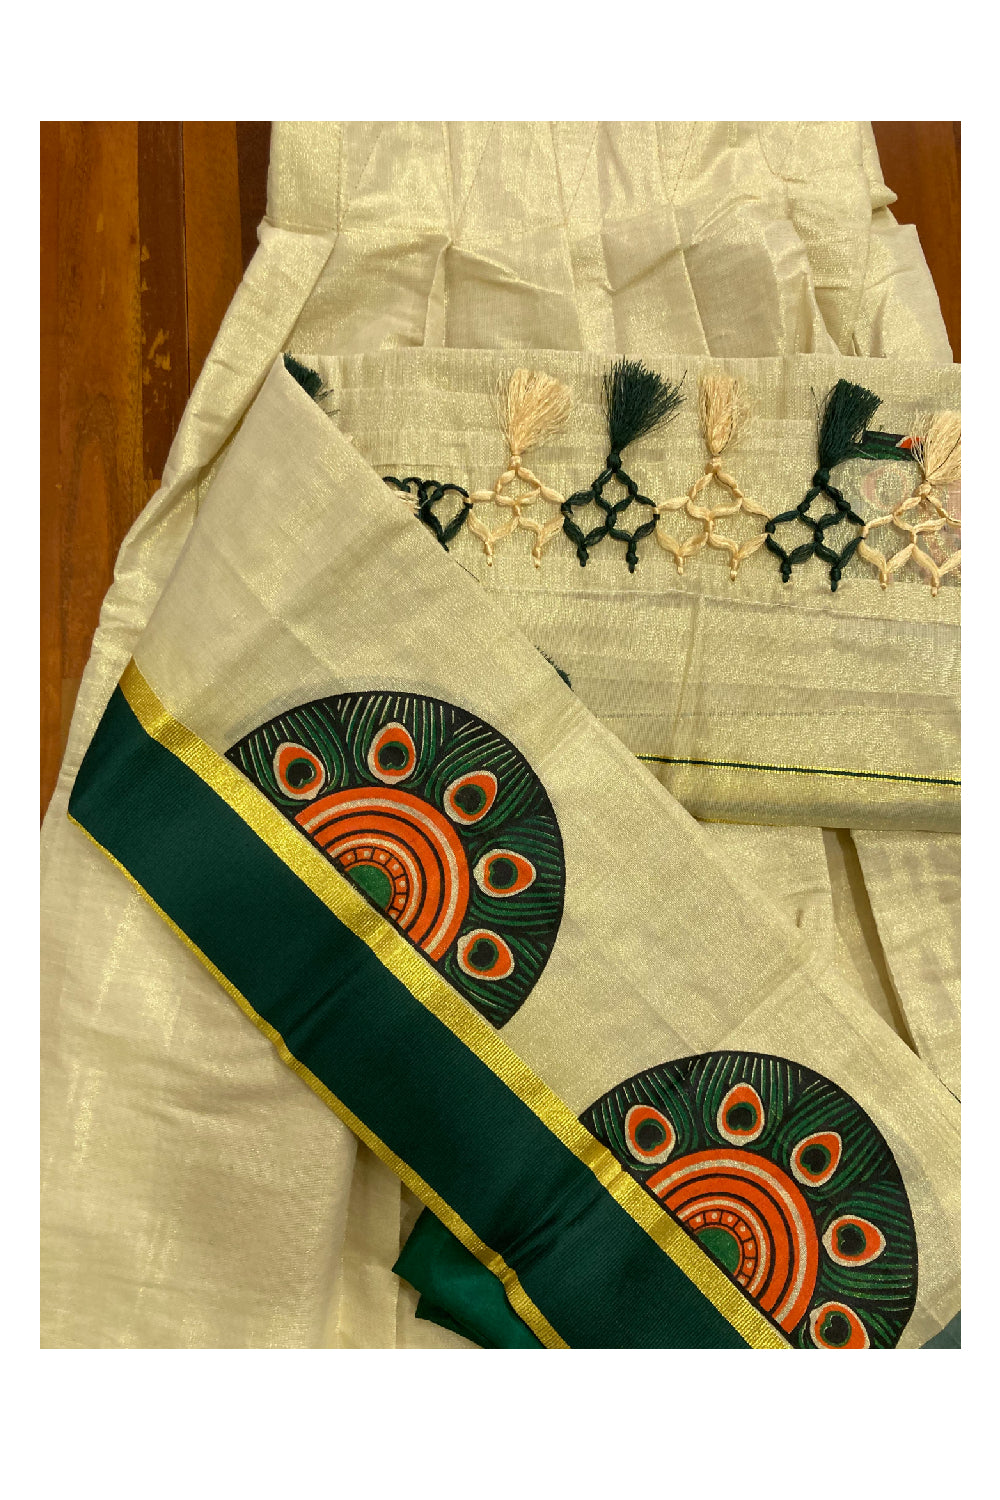 Kerala Tissue Stitched Dhavani Set with Blouse Piece and Neriyathu in with Green Accents